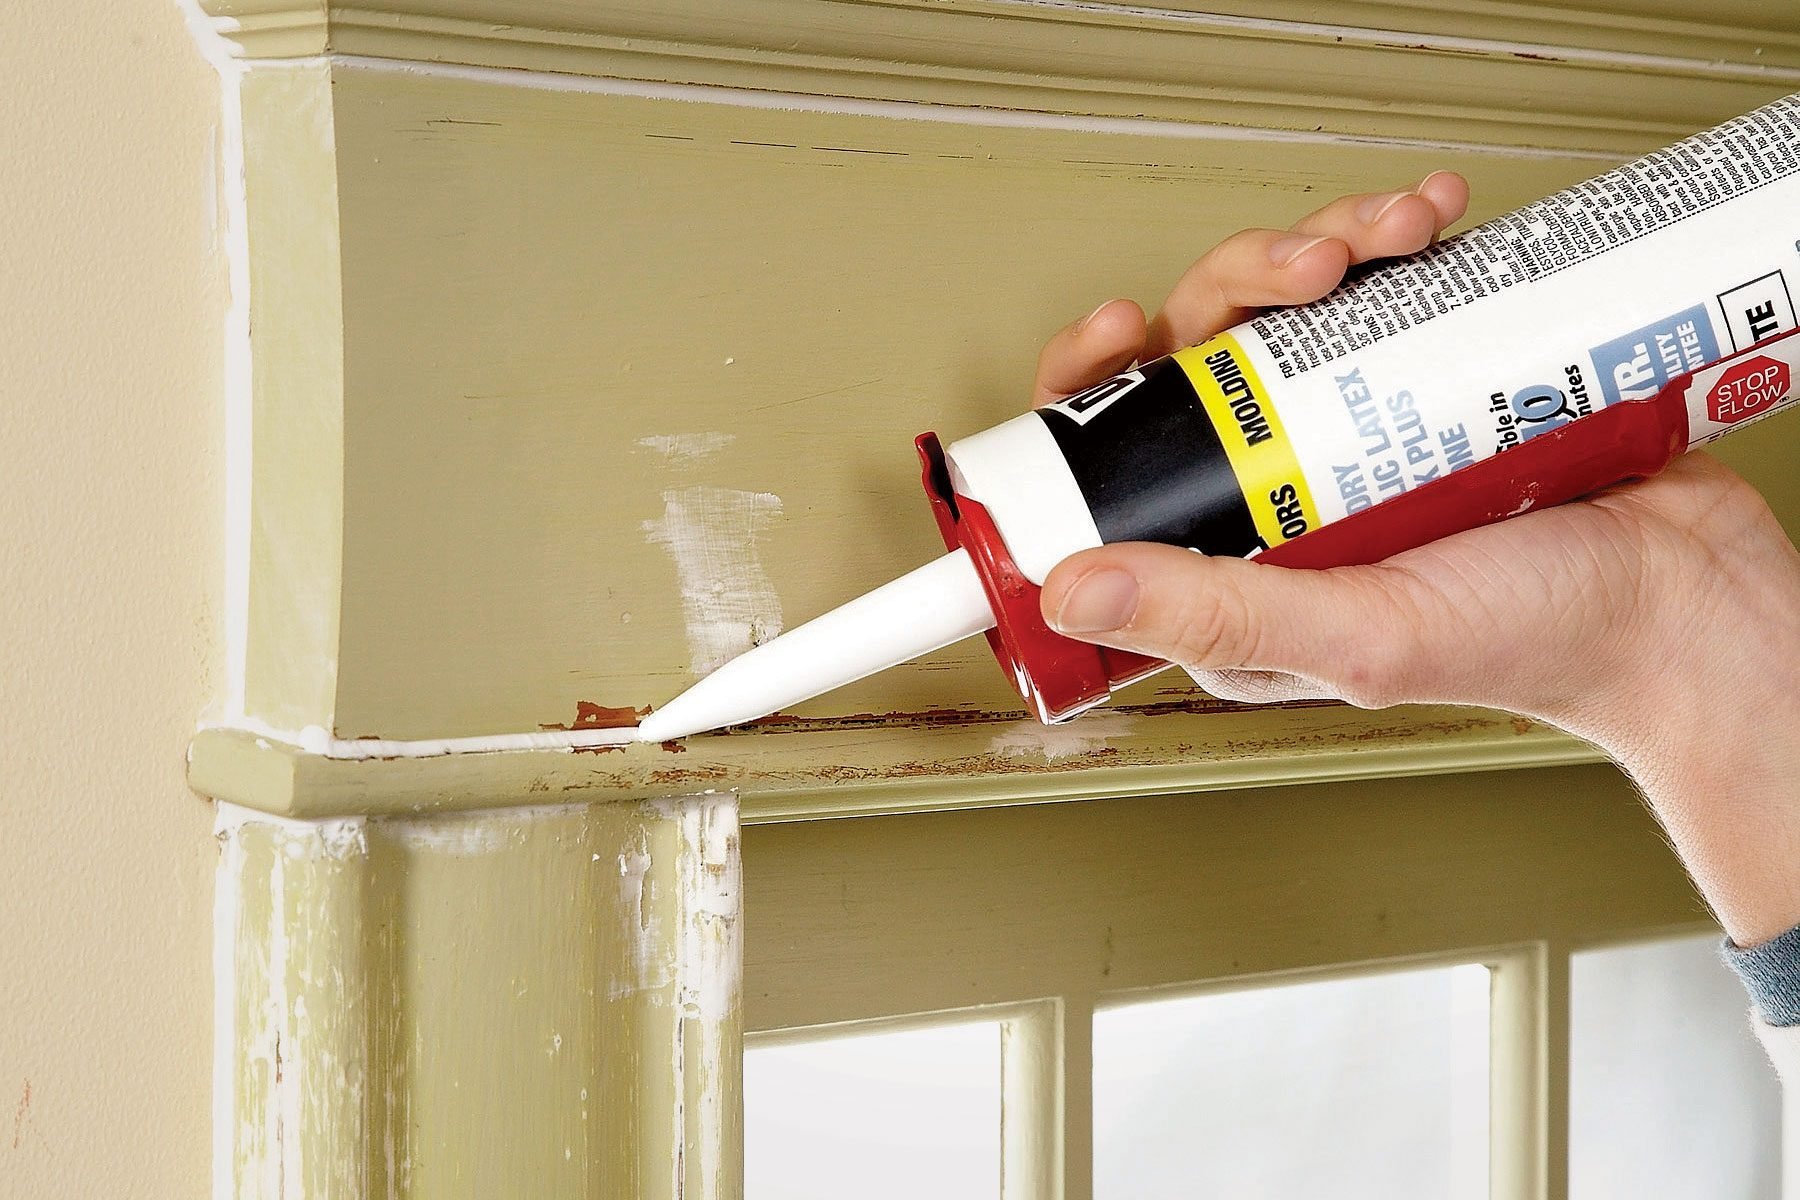 A person using caulk to fill gaps and cracks in a window